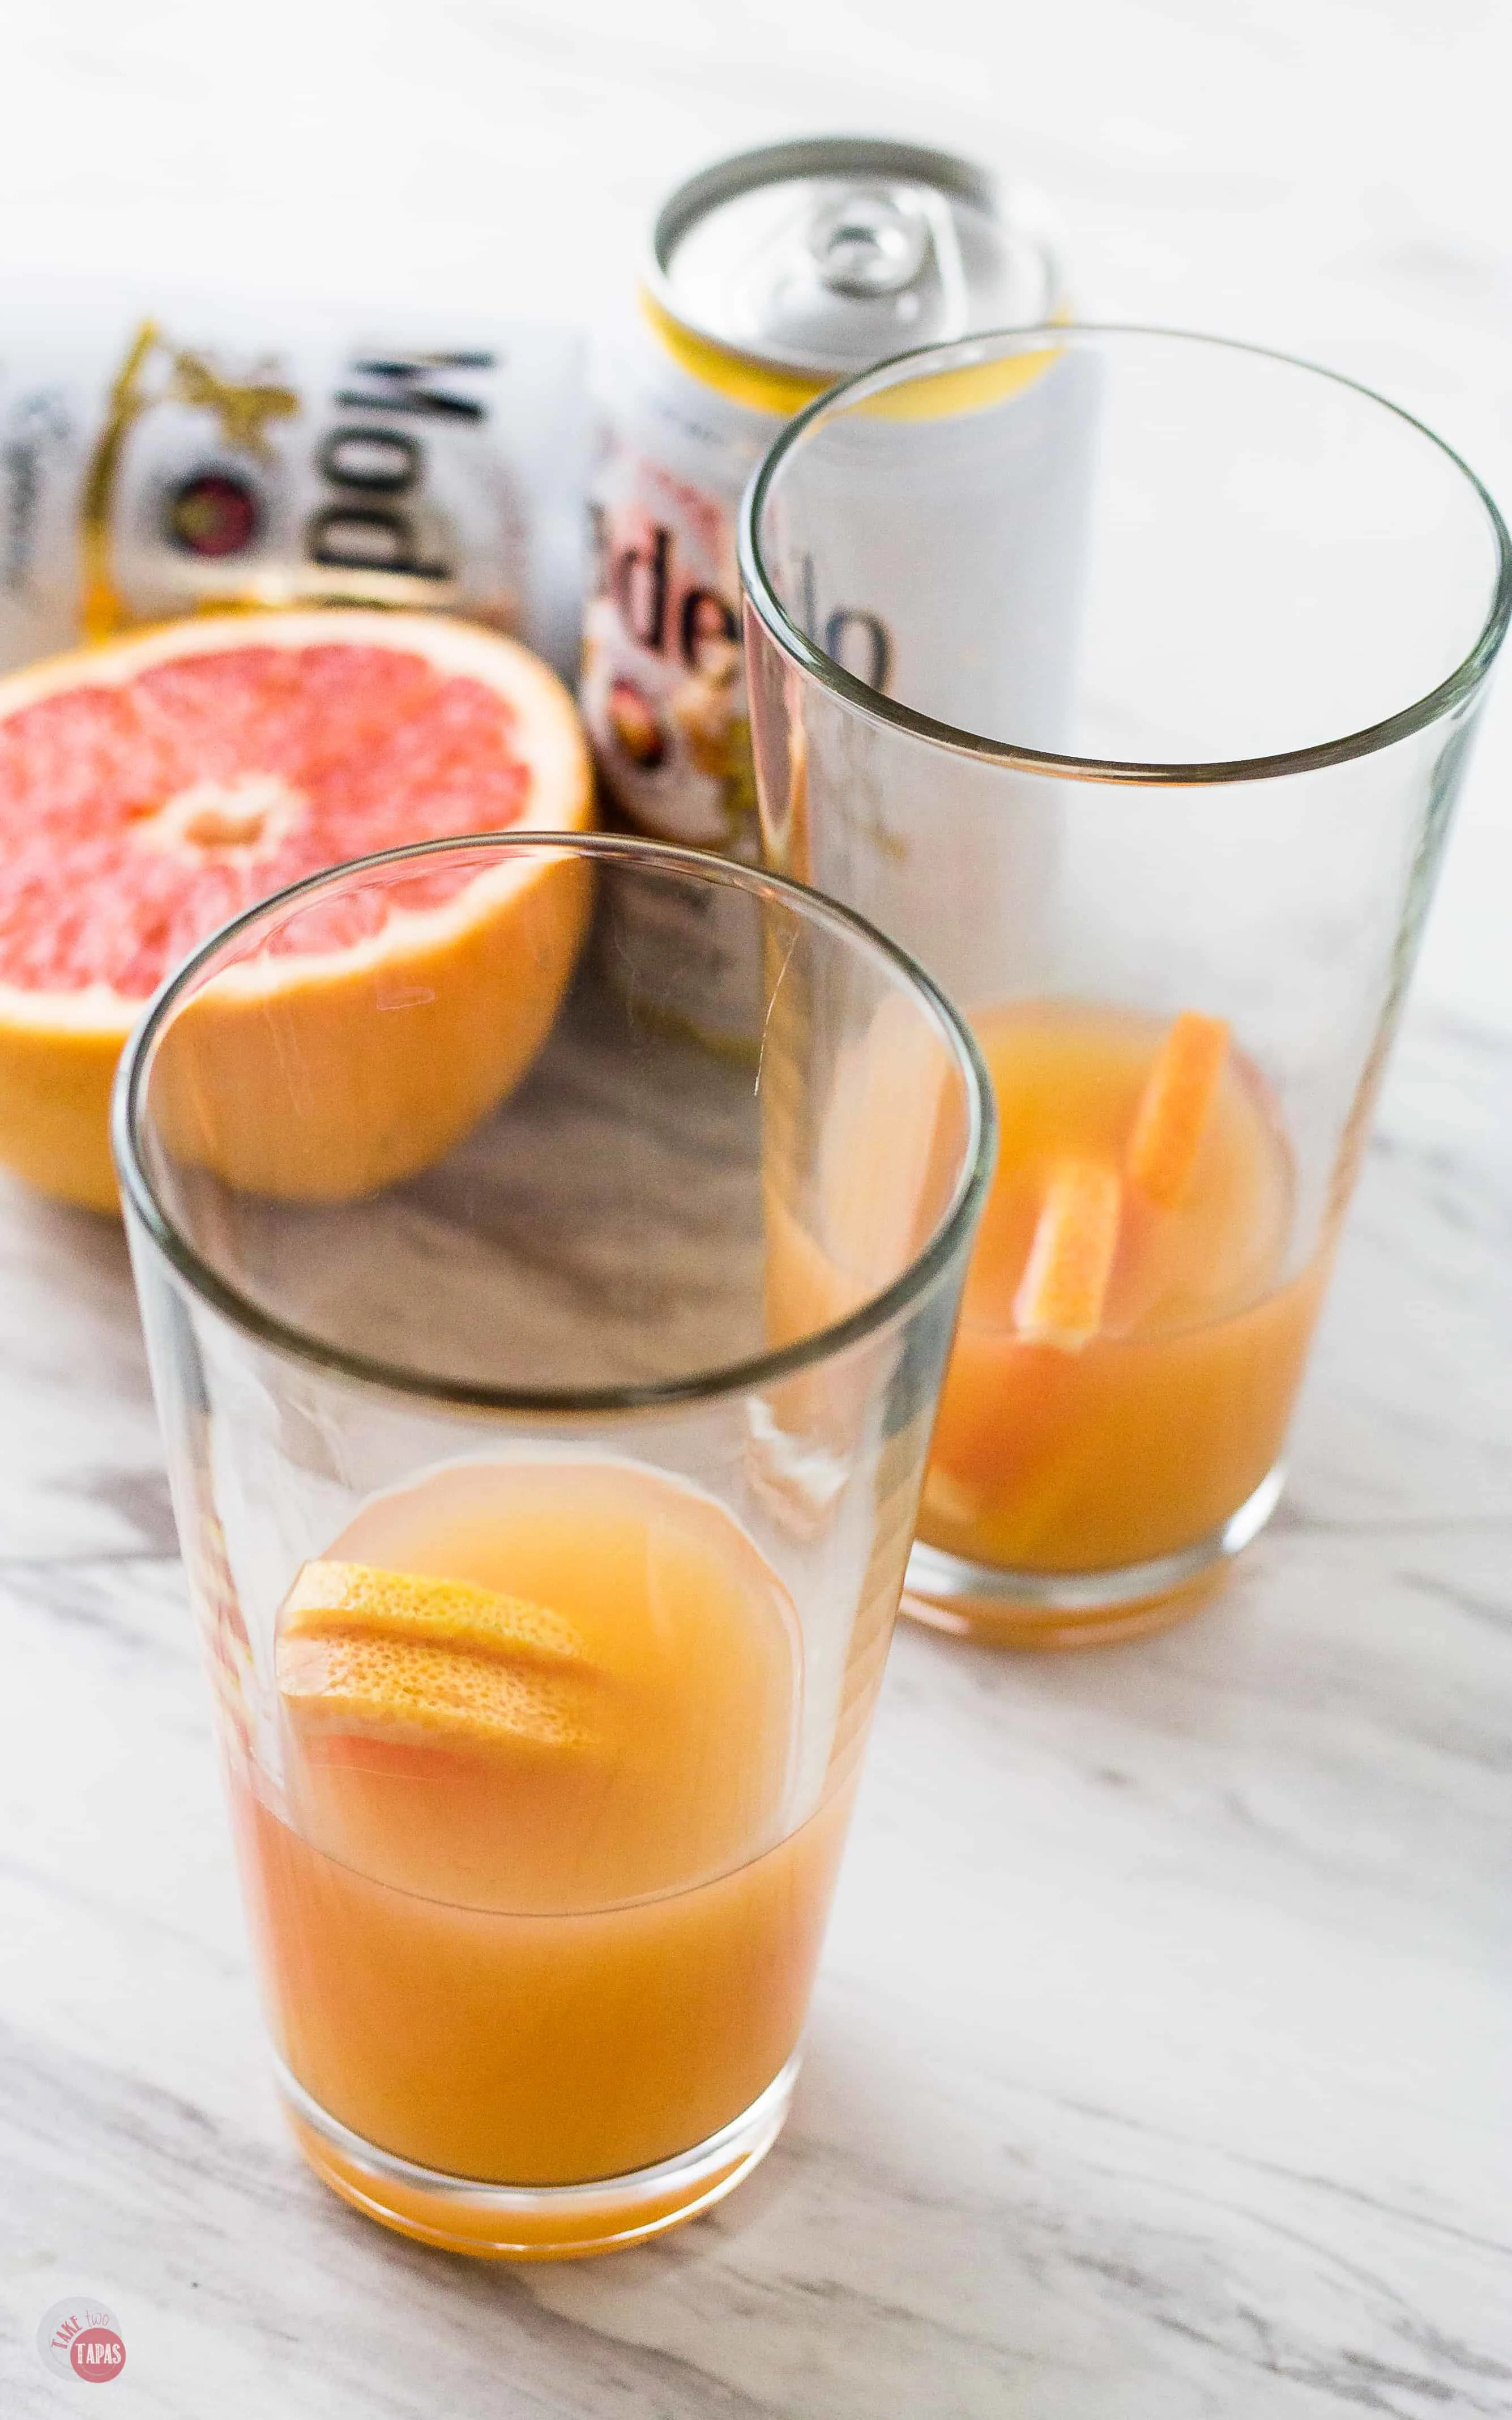 Start this Grapefruit Shandy with tequila and grapefruit in your glass | Take Two Tapas | #ShandyRecipe #grapefruit #cocktail #Beer #AD #CelebratorySips #CelebrateWithModelo